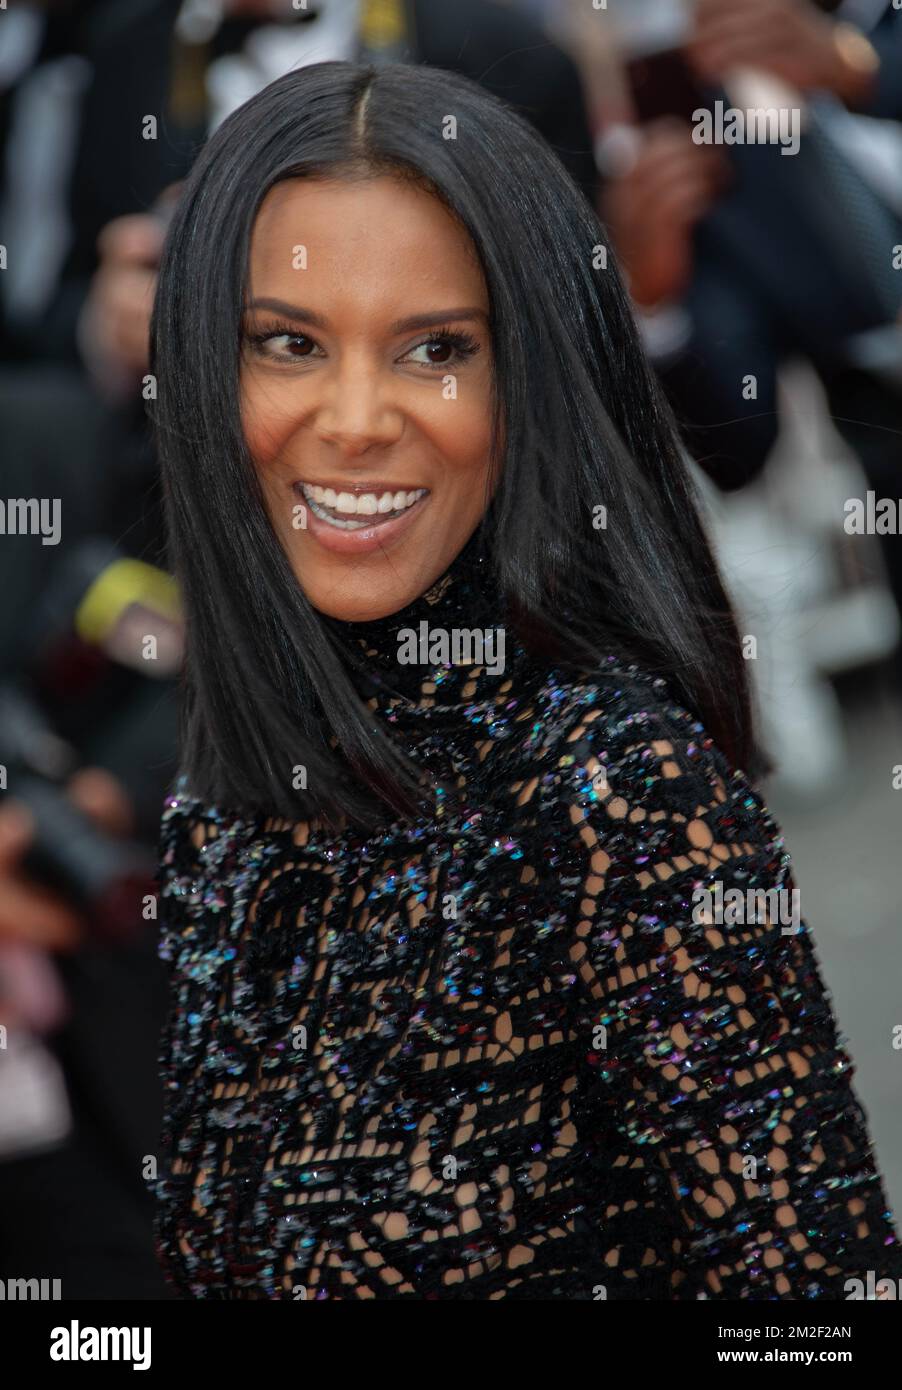 Opening evening and red carpet of the Cannes Film Festival . Shy'm | Soirée d'ouverture et montée des marches du Festival de Cannes . Shy'm 08/05/2018 Stock Photo